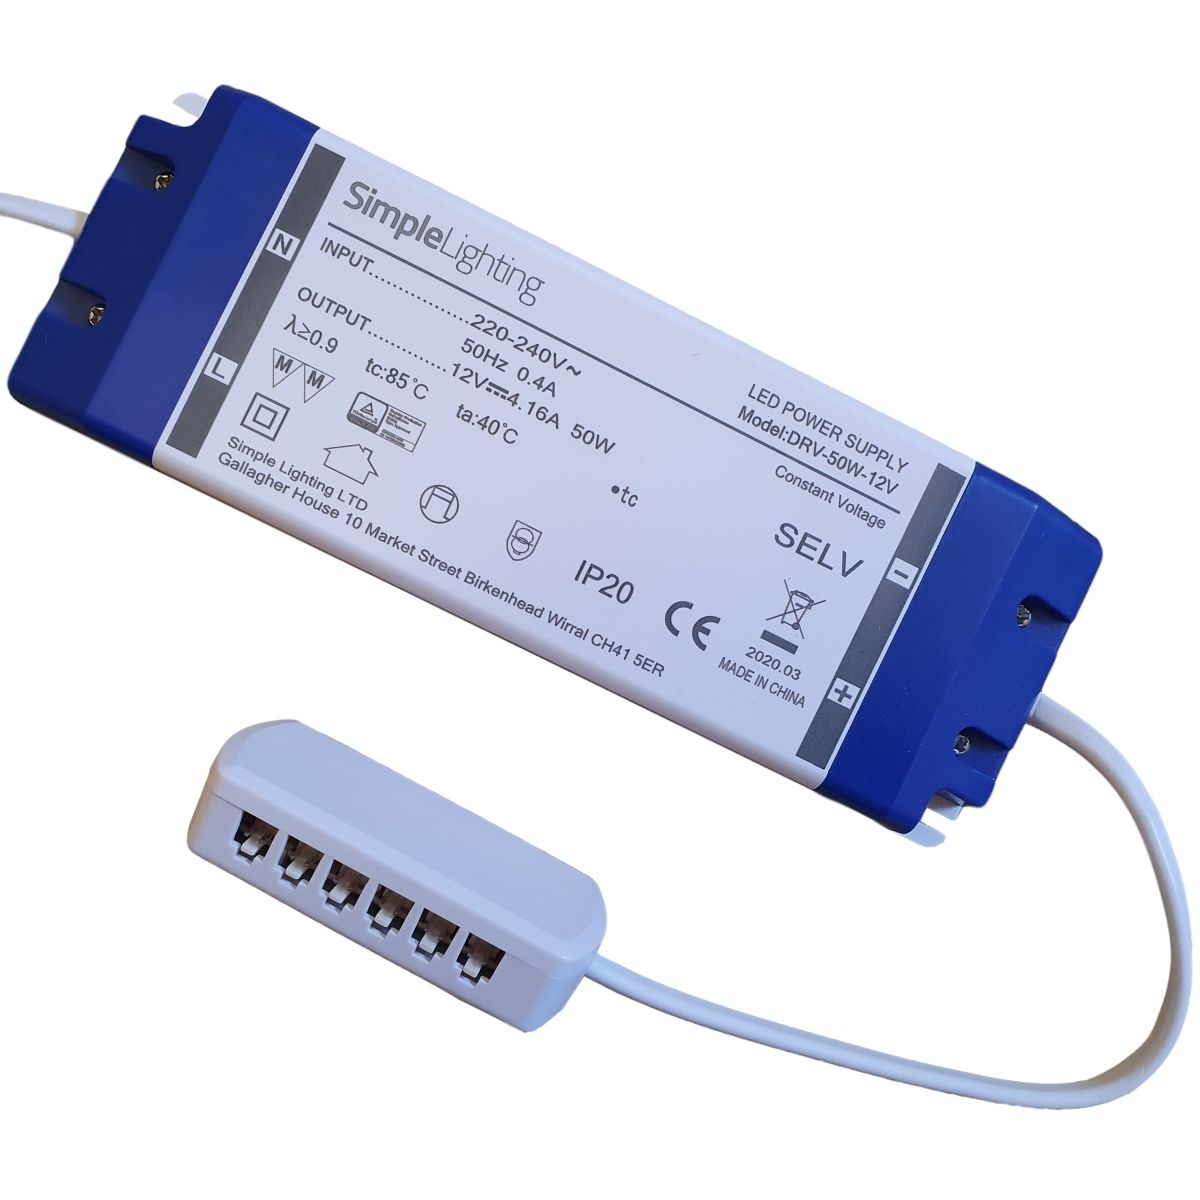 Mains wirable 50w LED Driver, with way distributor.